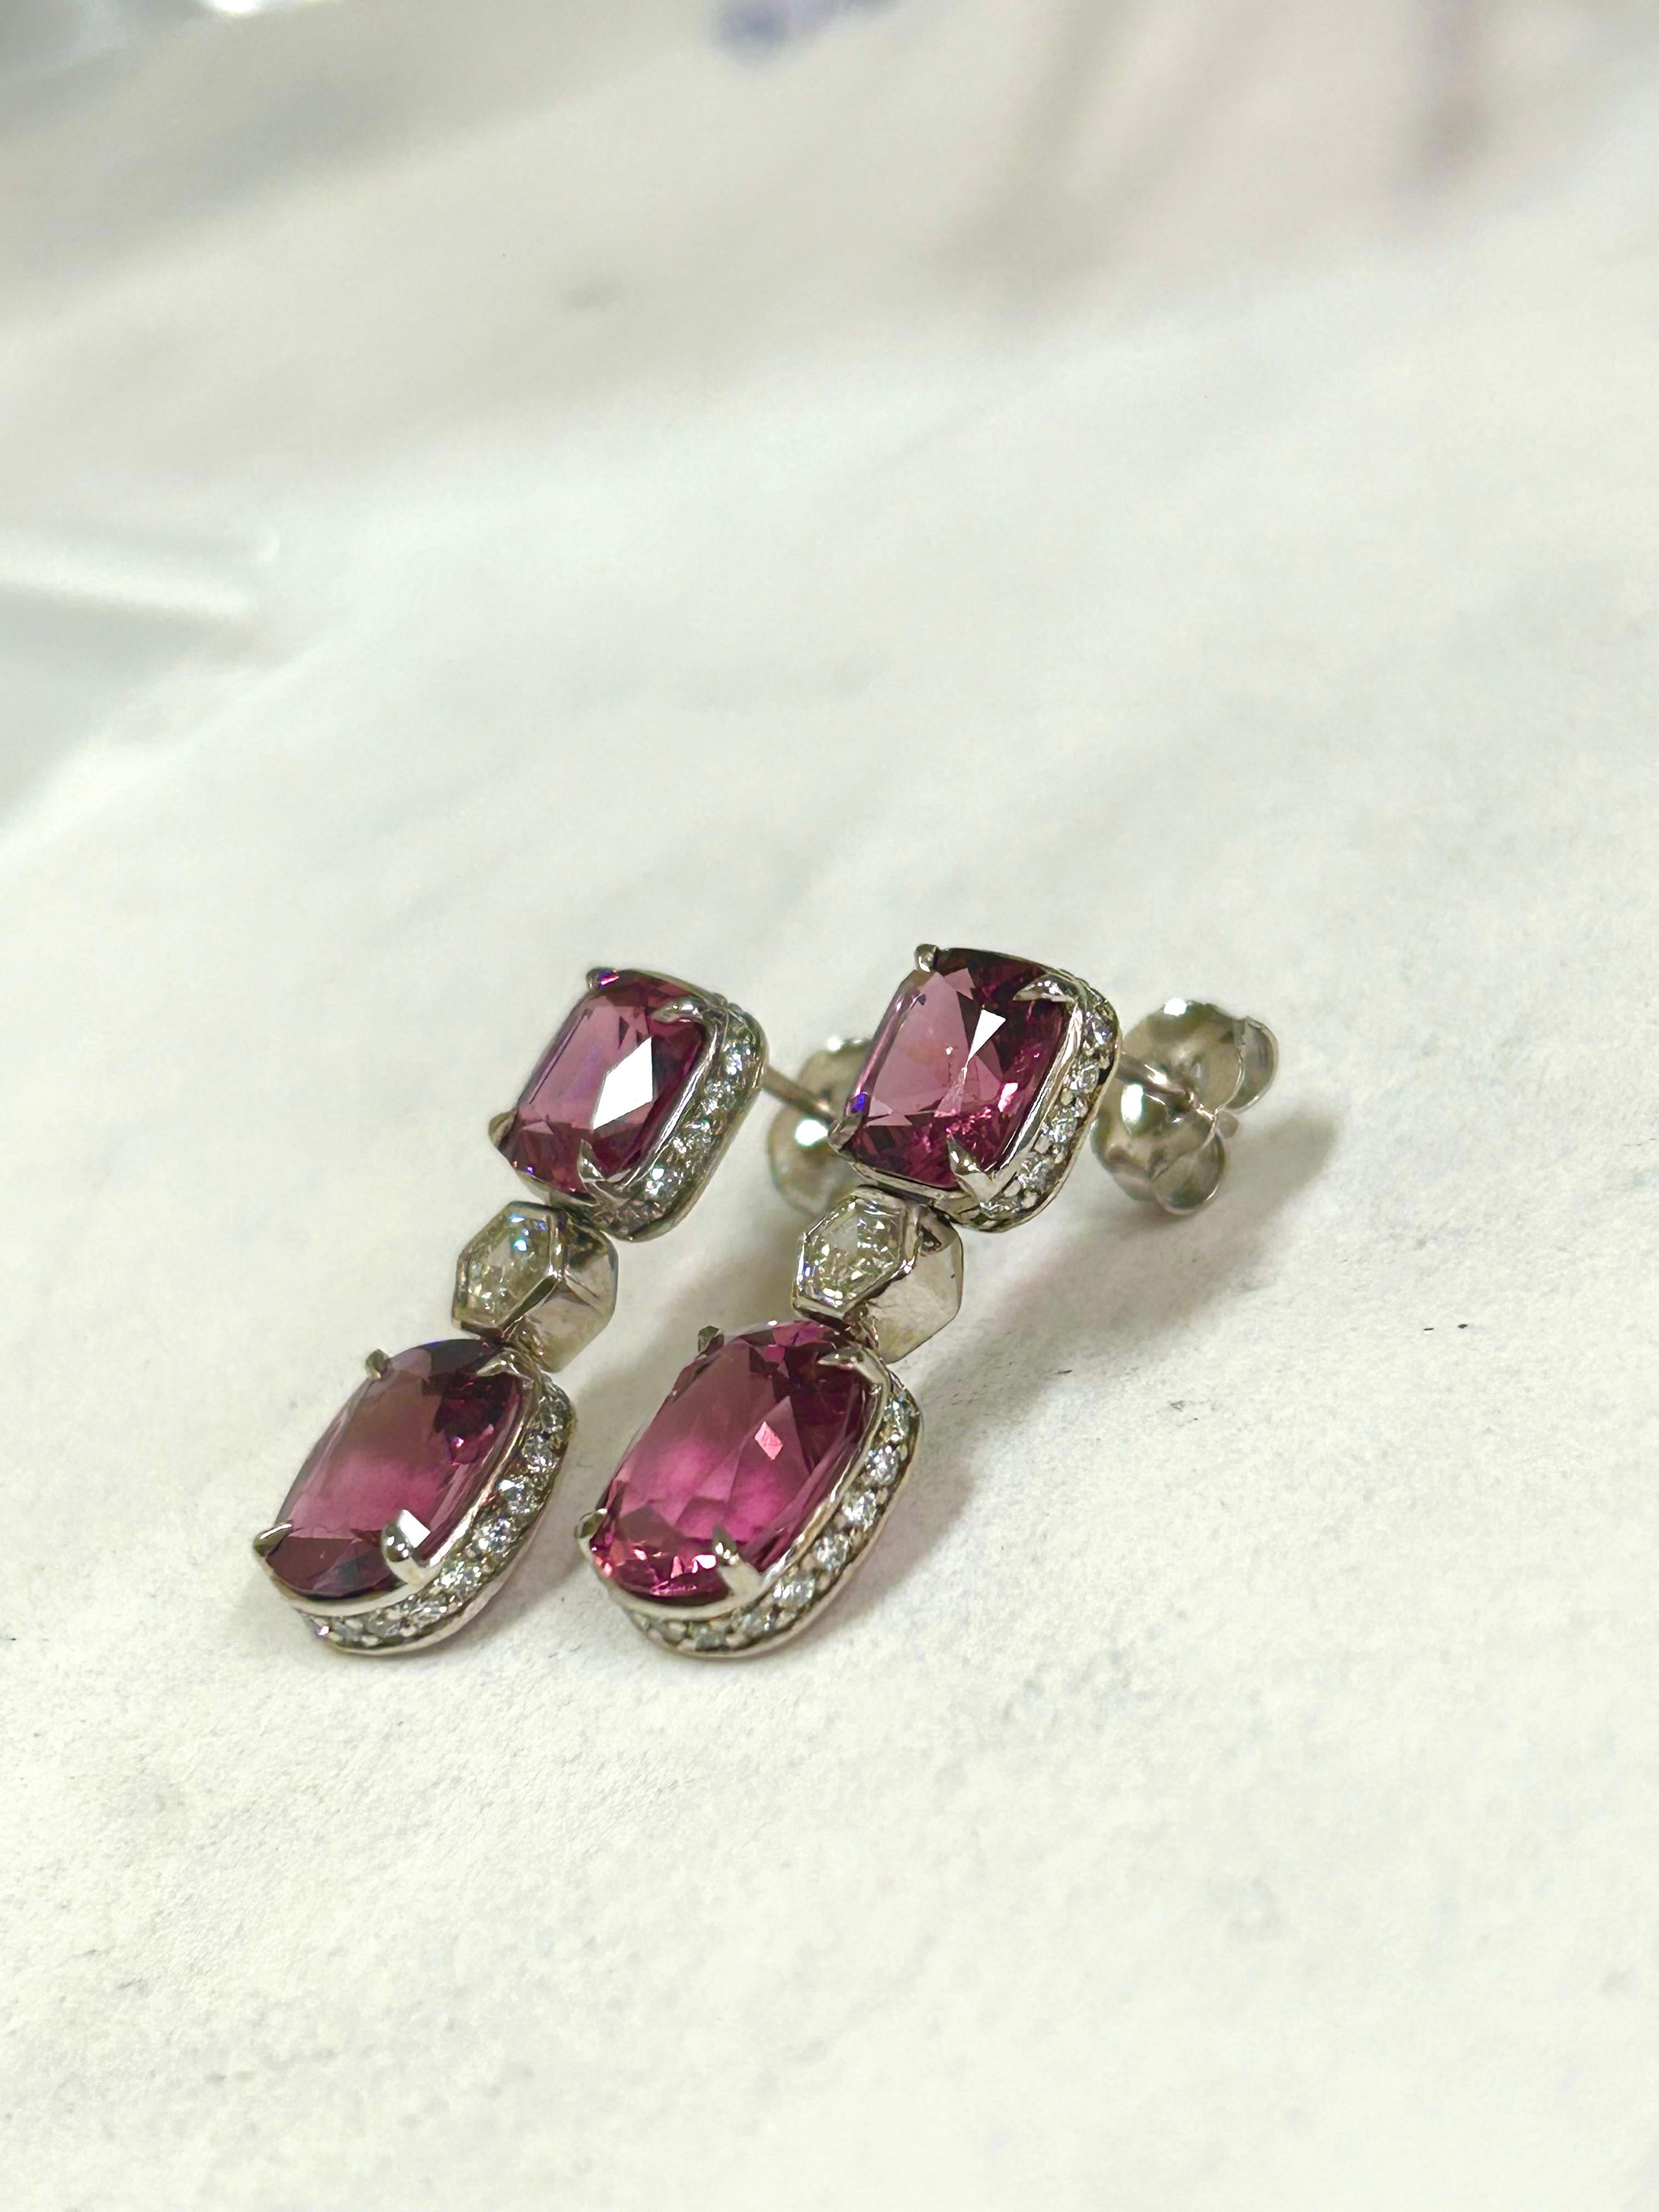 Modern 6.75ct untreated Burmese spinel earrings in 18K white gold. For Sale